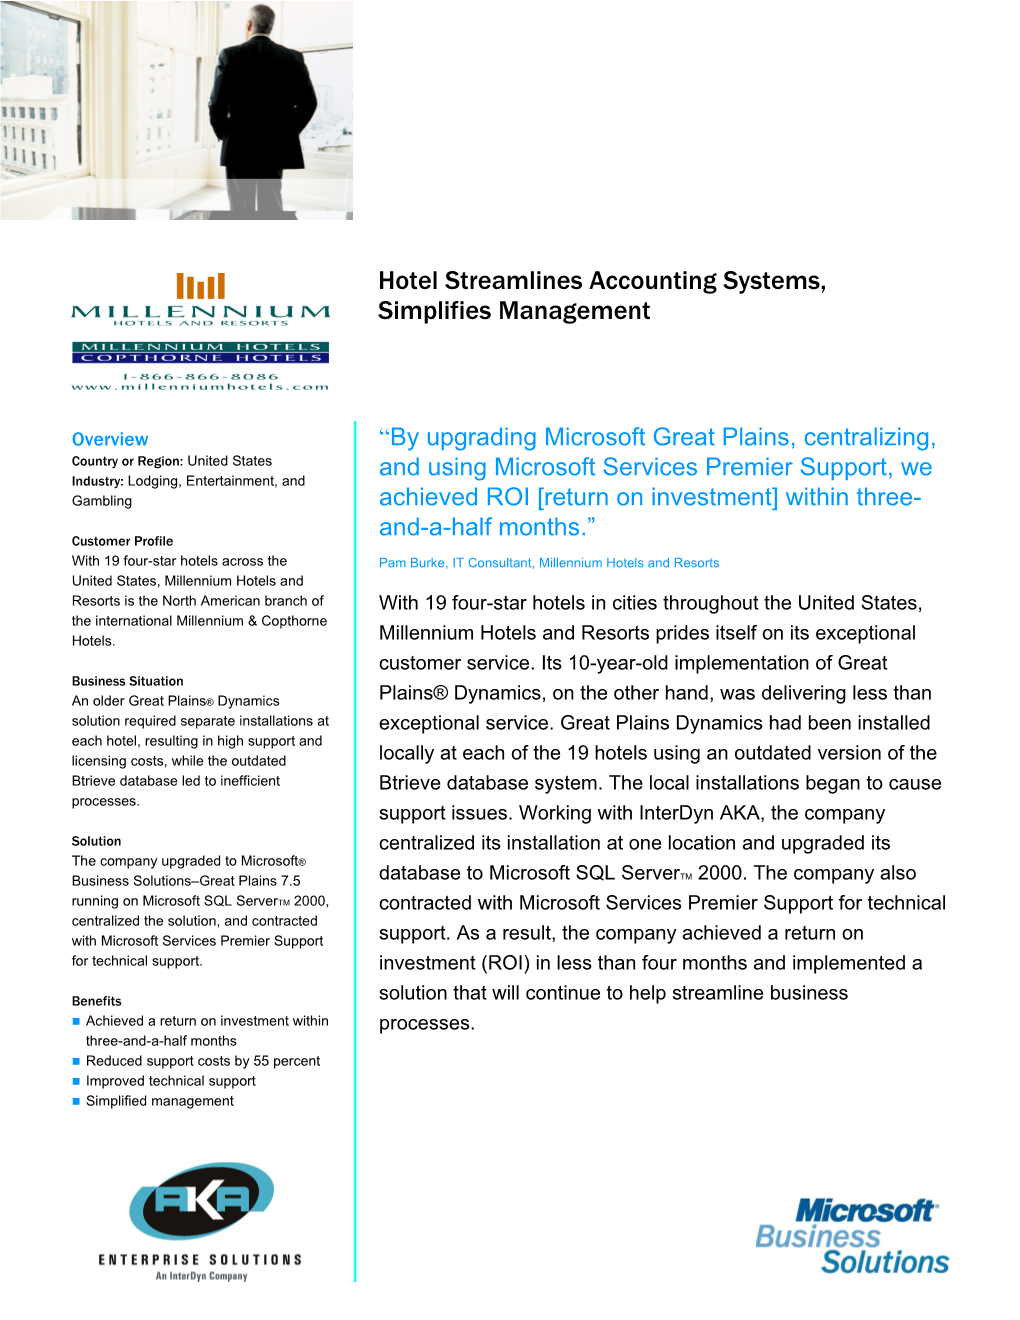 Hotel Streamlines Accounting Systems, Simplifies Management